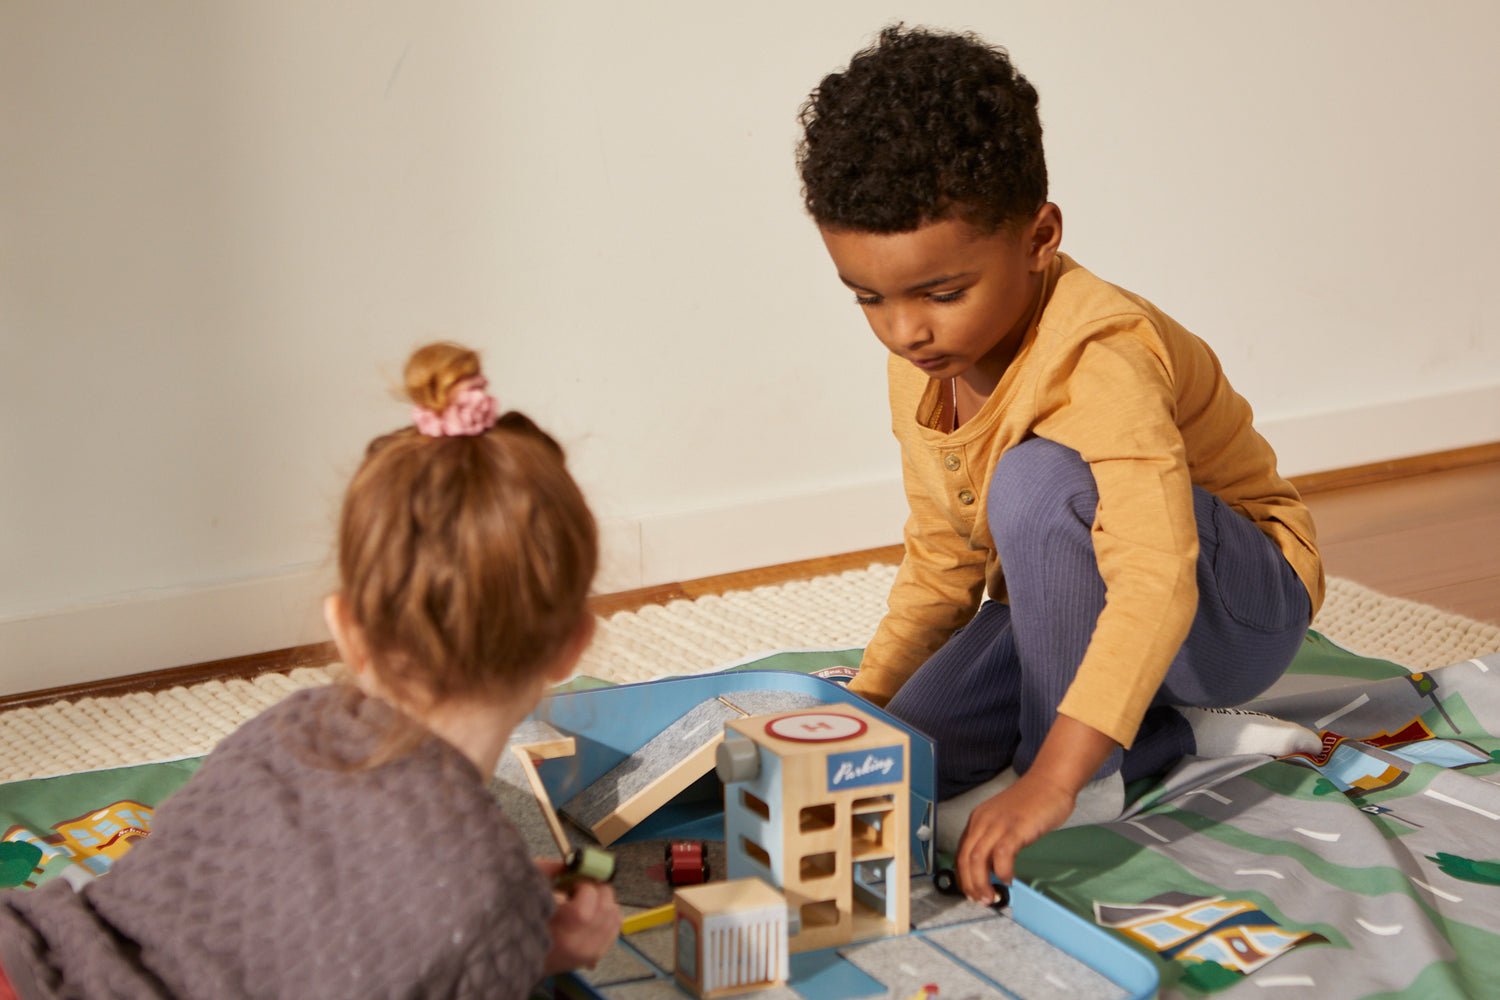 educational_play_toy_suitcase_cotton_playmat_car_town_sustainable_motor_skills.jpg